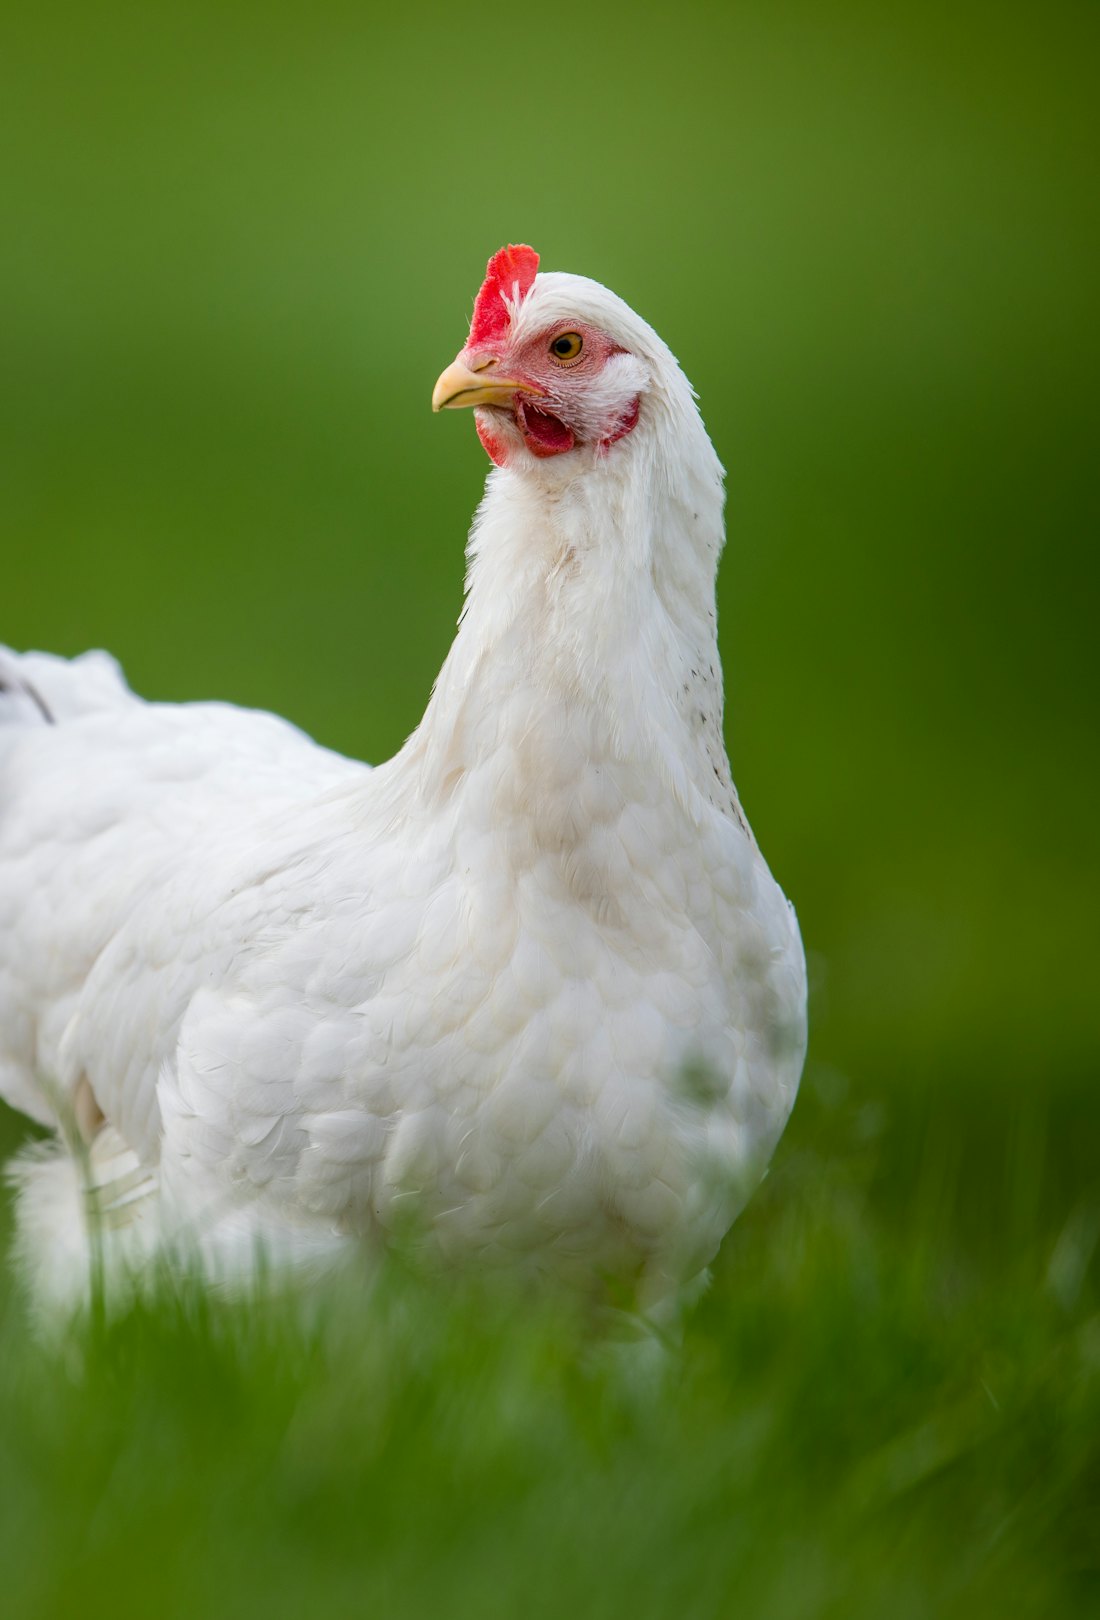 Keeping chickens has been a growing trend, especially among celebrities.